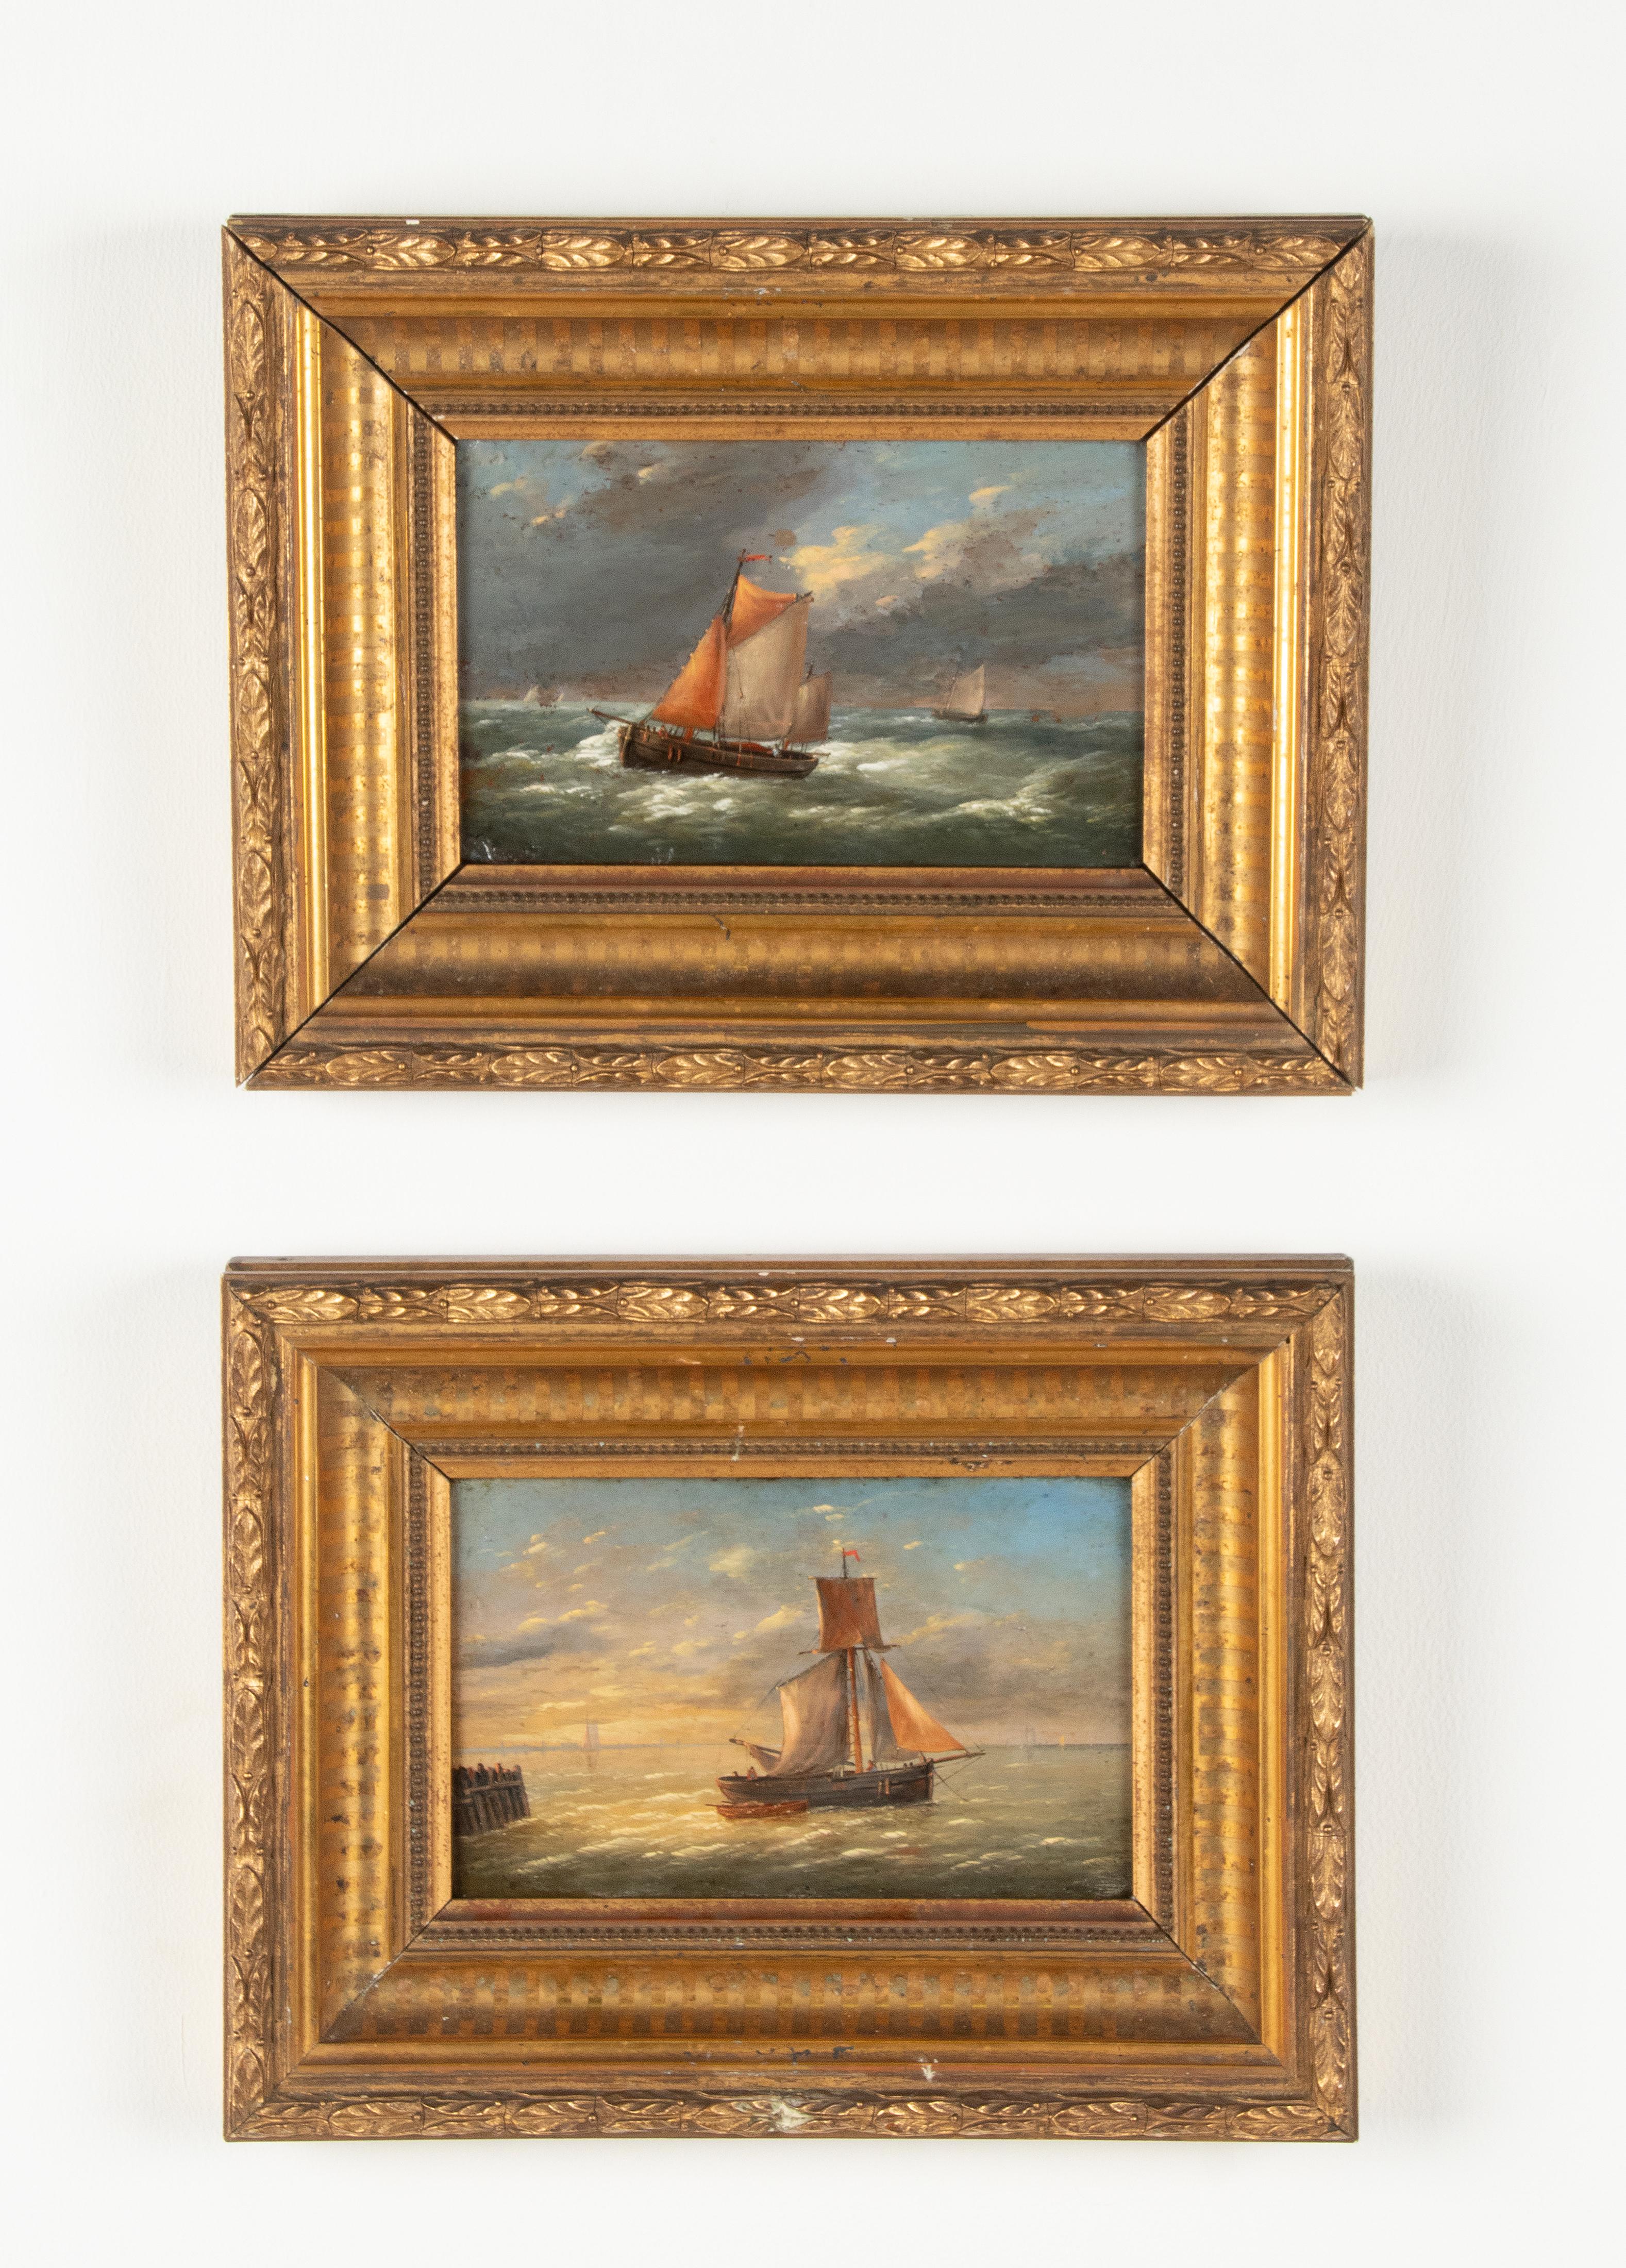 A lovely pair of small antique oil paintings of sailing boats on sea. They are painted on wooden panels (oak). 
They are framed in antique wooden gilt frames. They are not signed. 
One has some spots on the paint. Otherwise in good condition. Bright